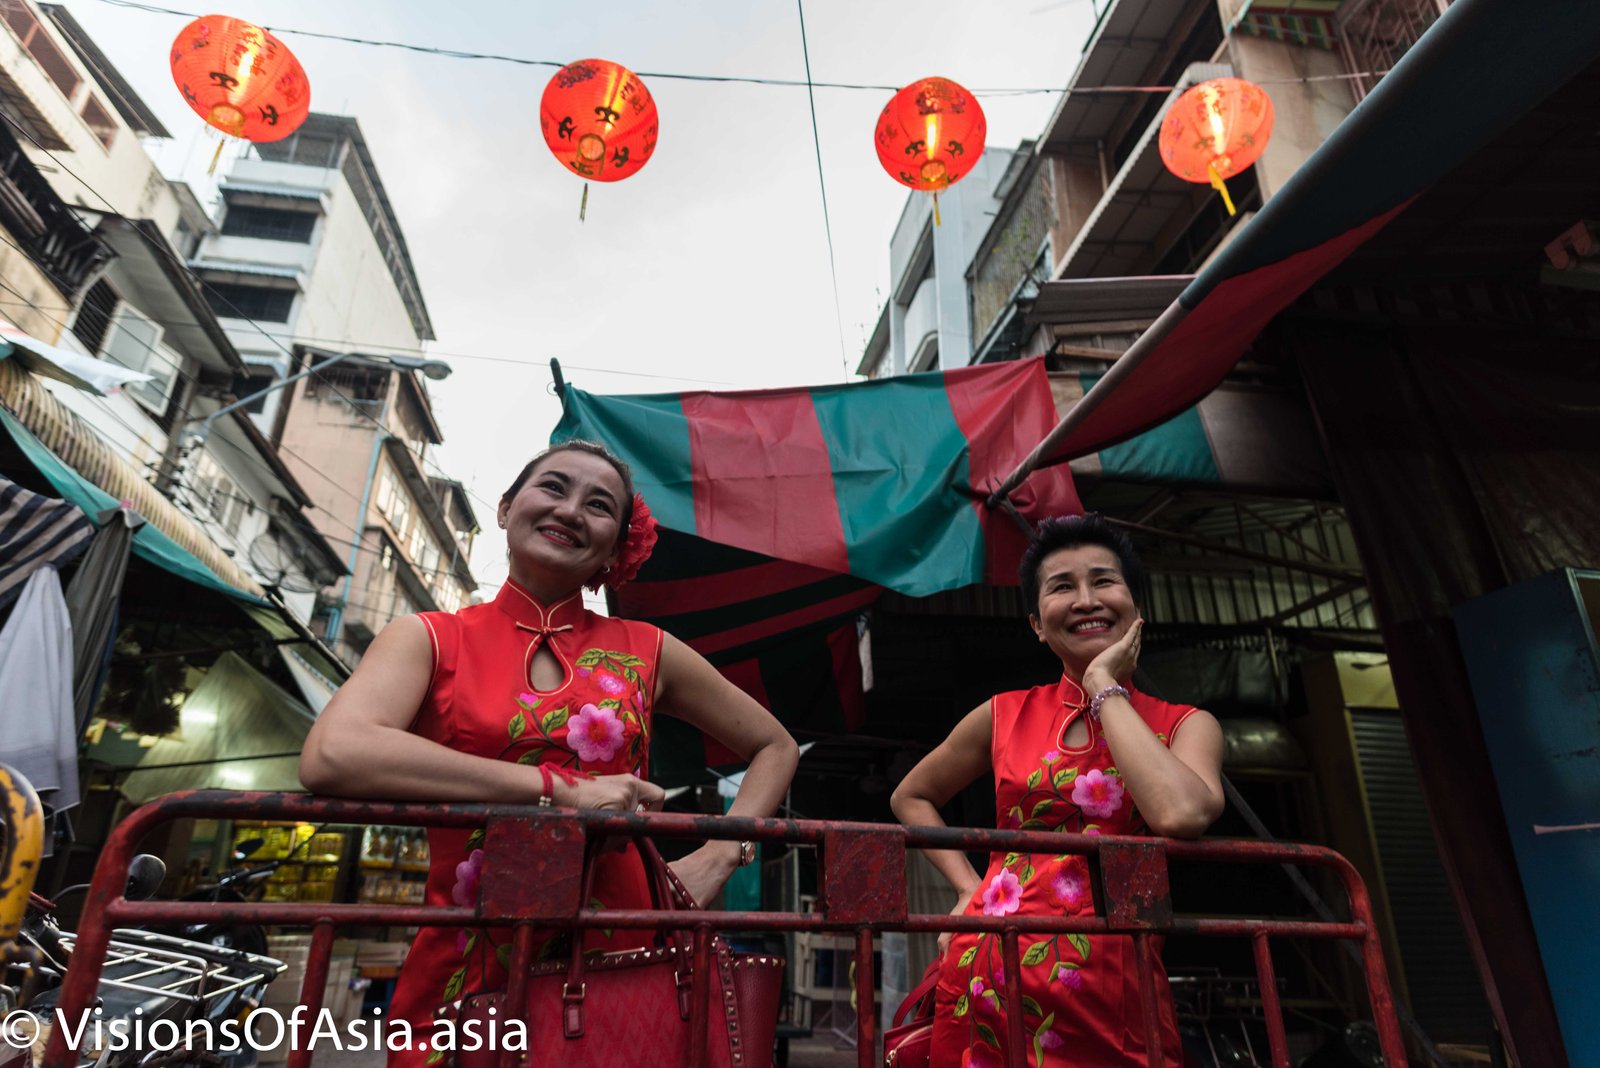 Two ladies in red Quipao